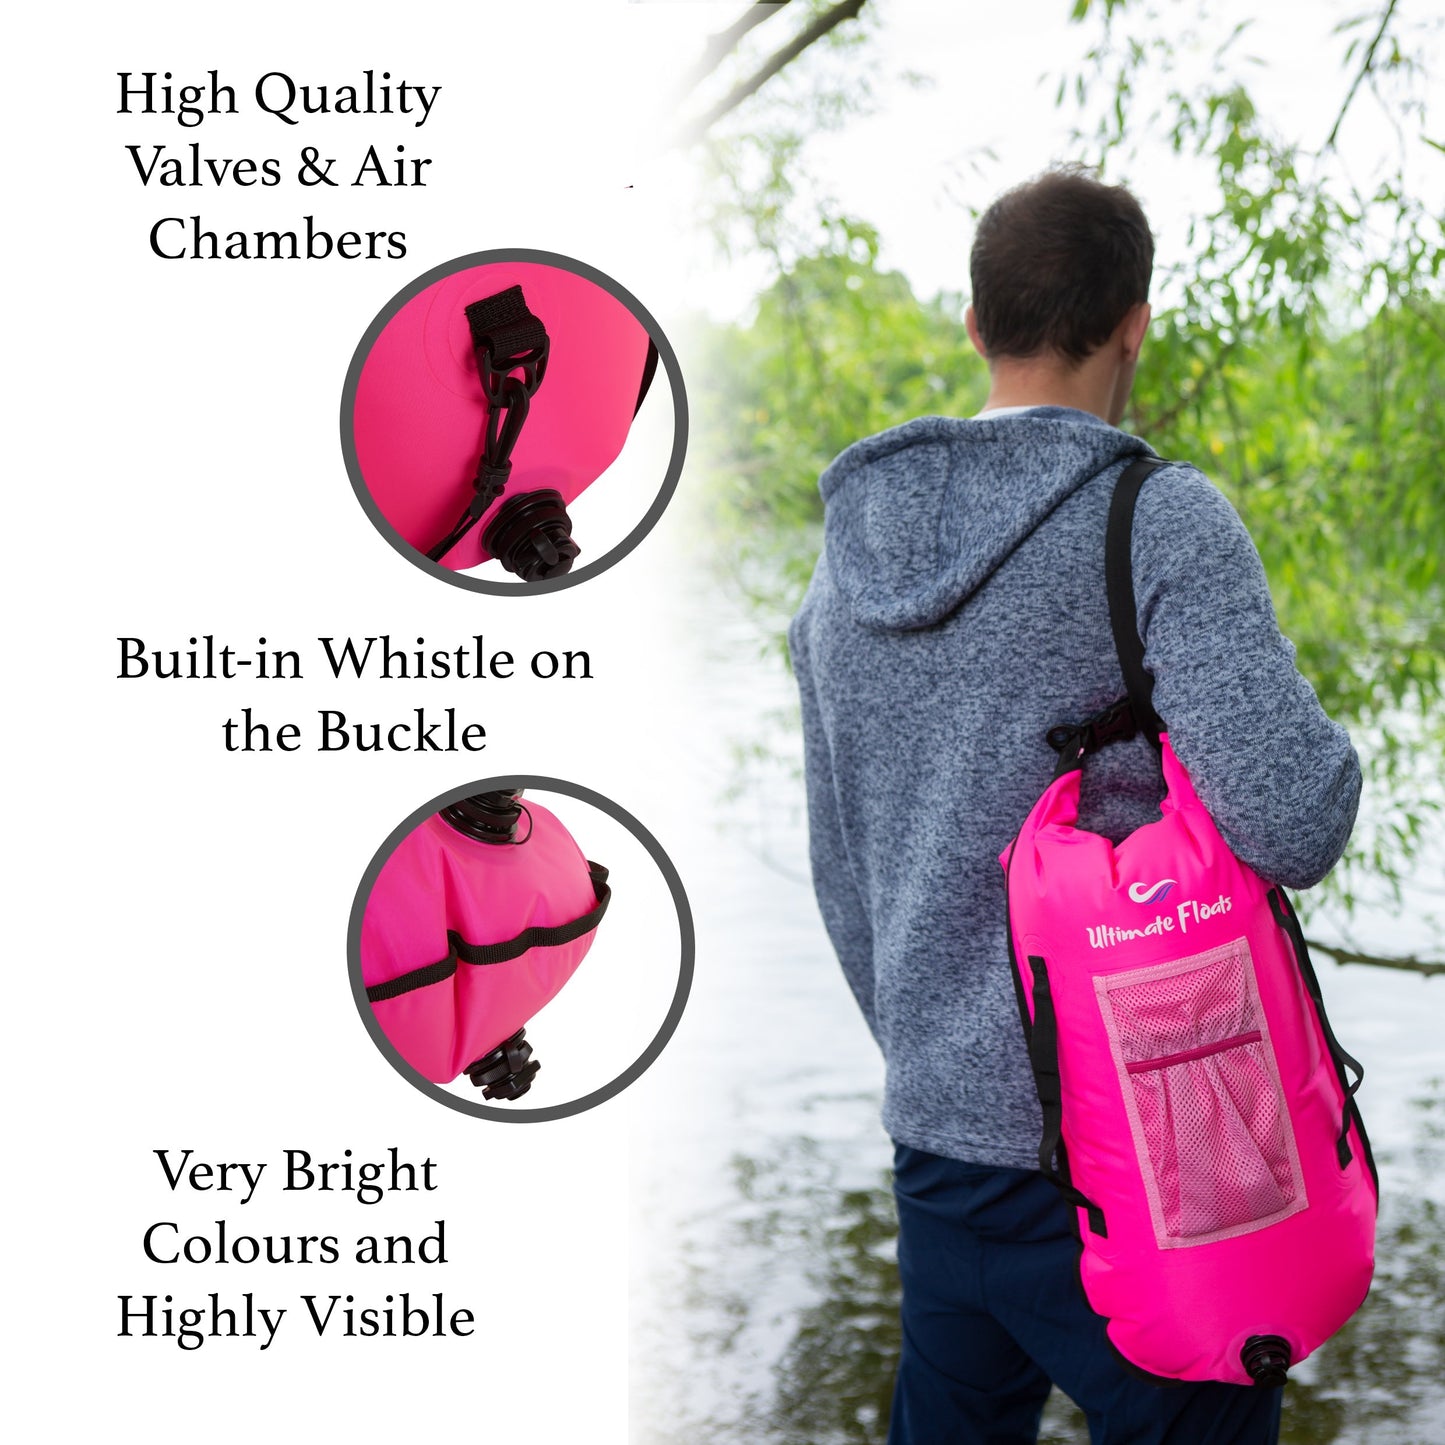 Ultimate Floats 28L Tow Float Dry Bag for Open Water Swimming - Pink